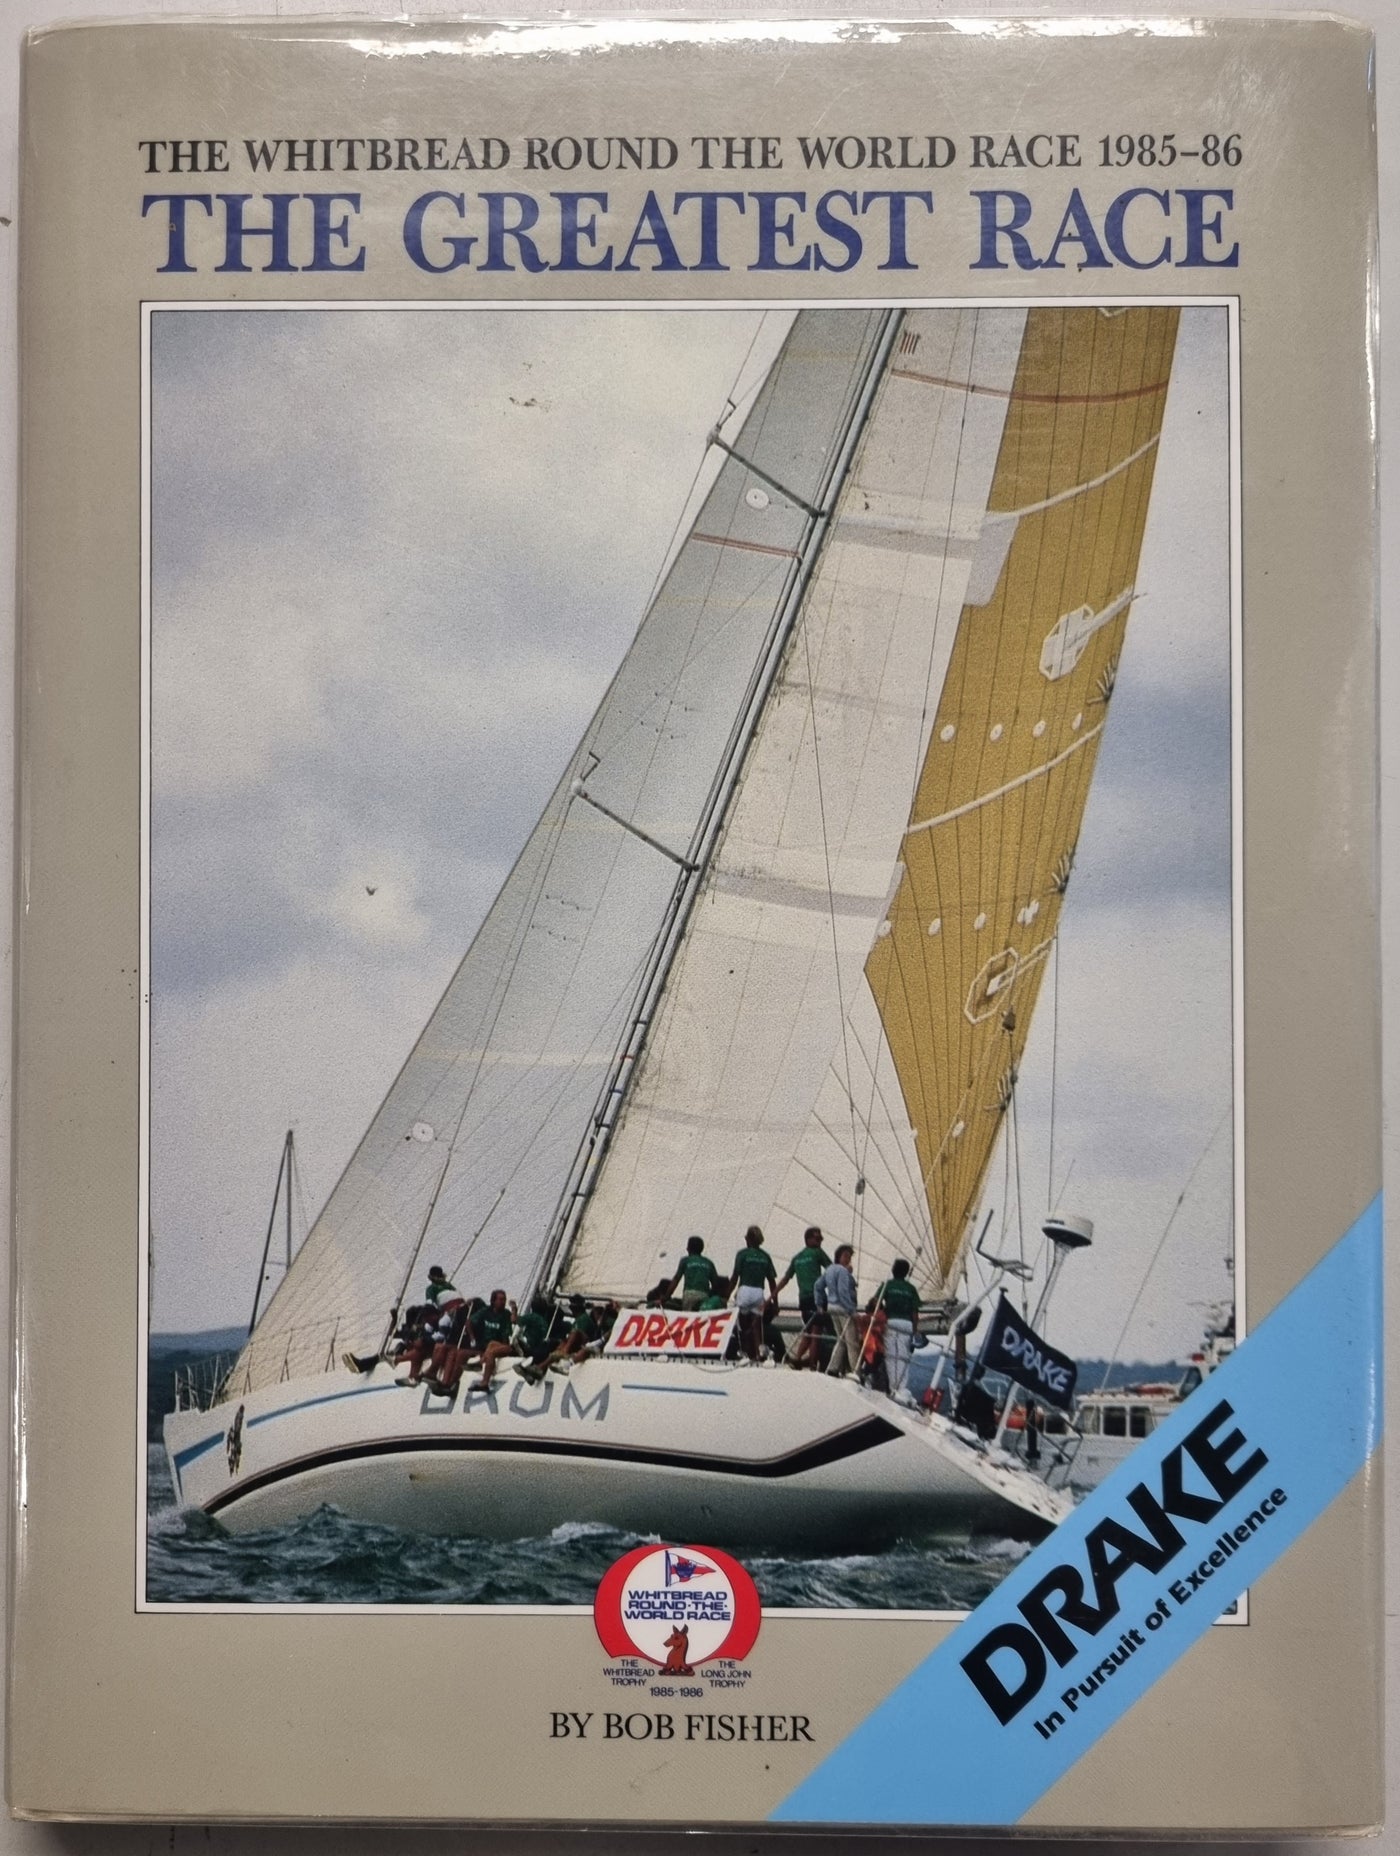 The Greatest Race: The Whitbread Round the World Race 1985-86